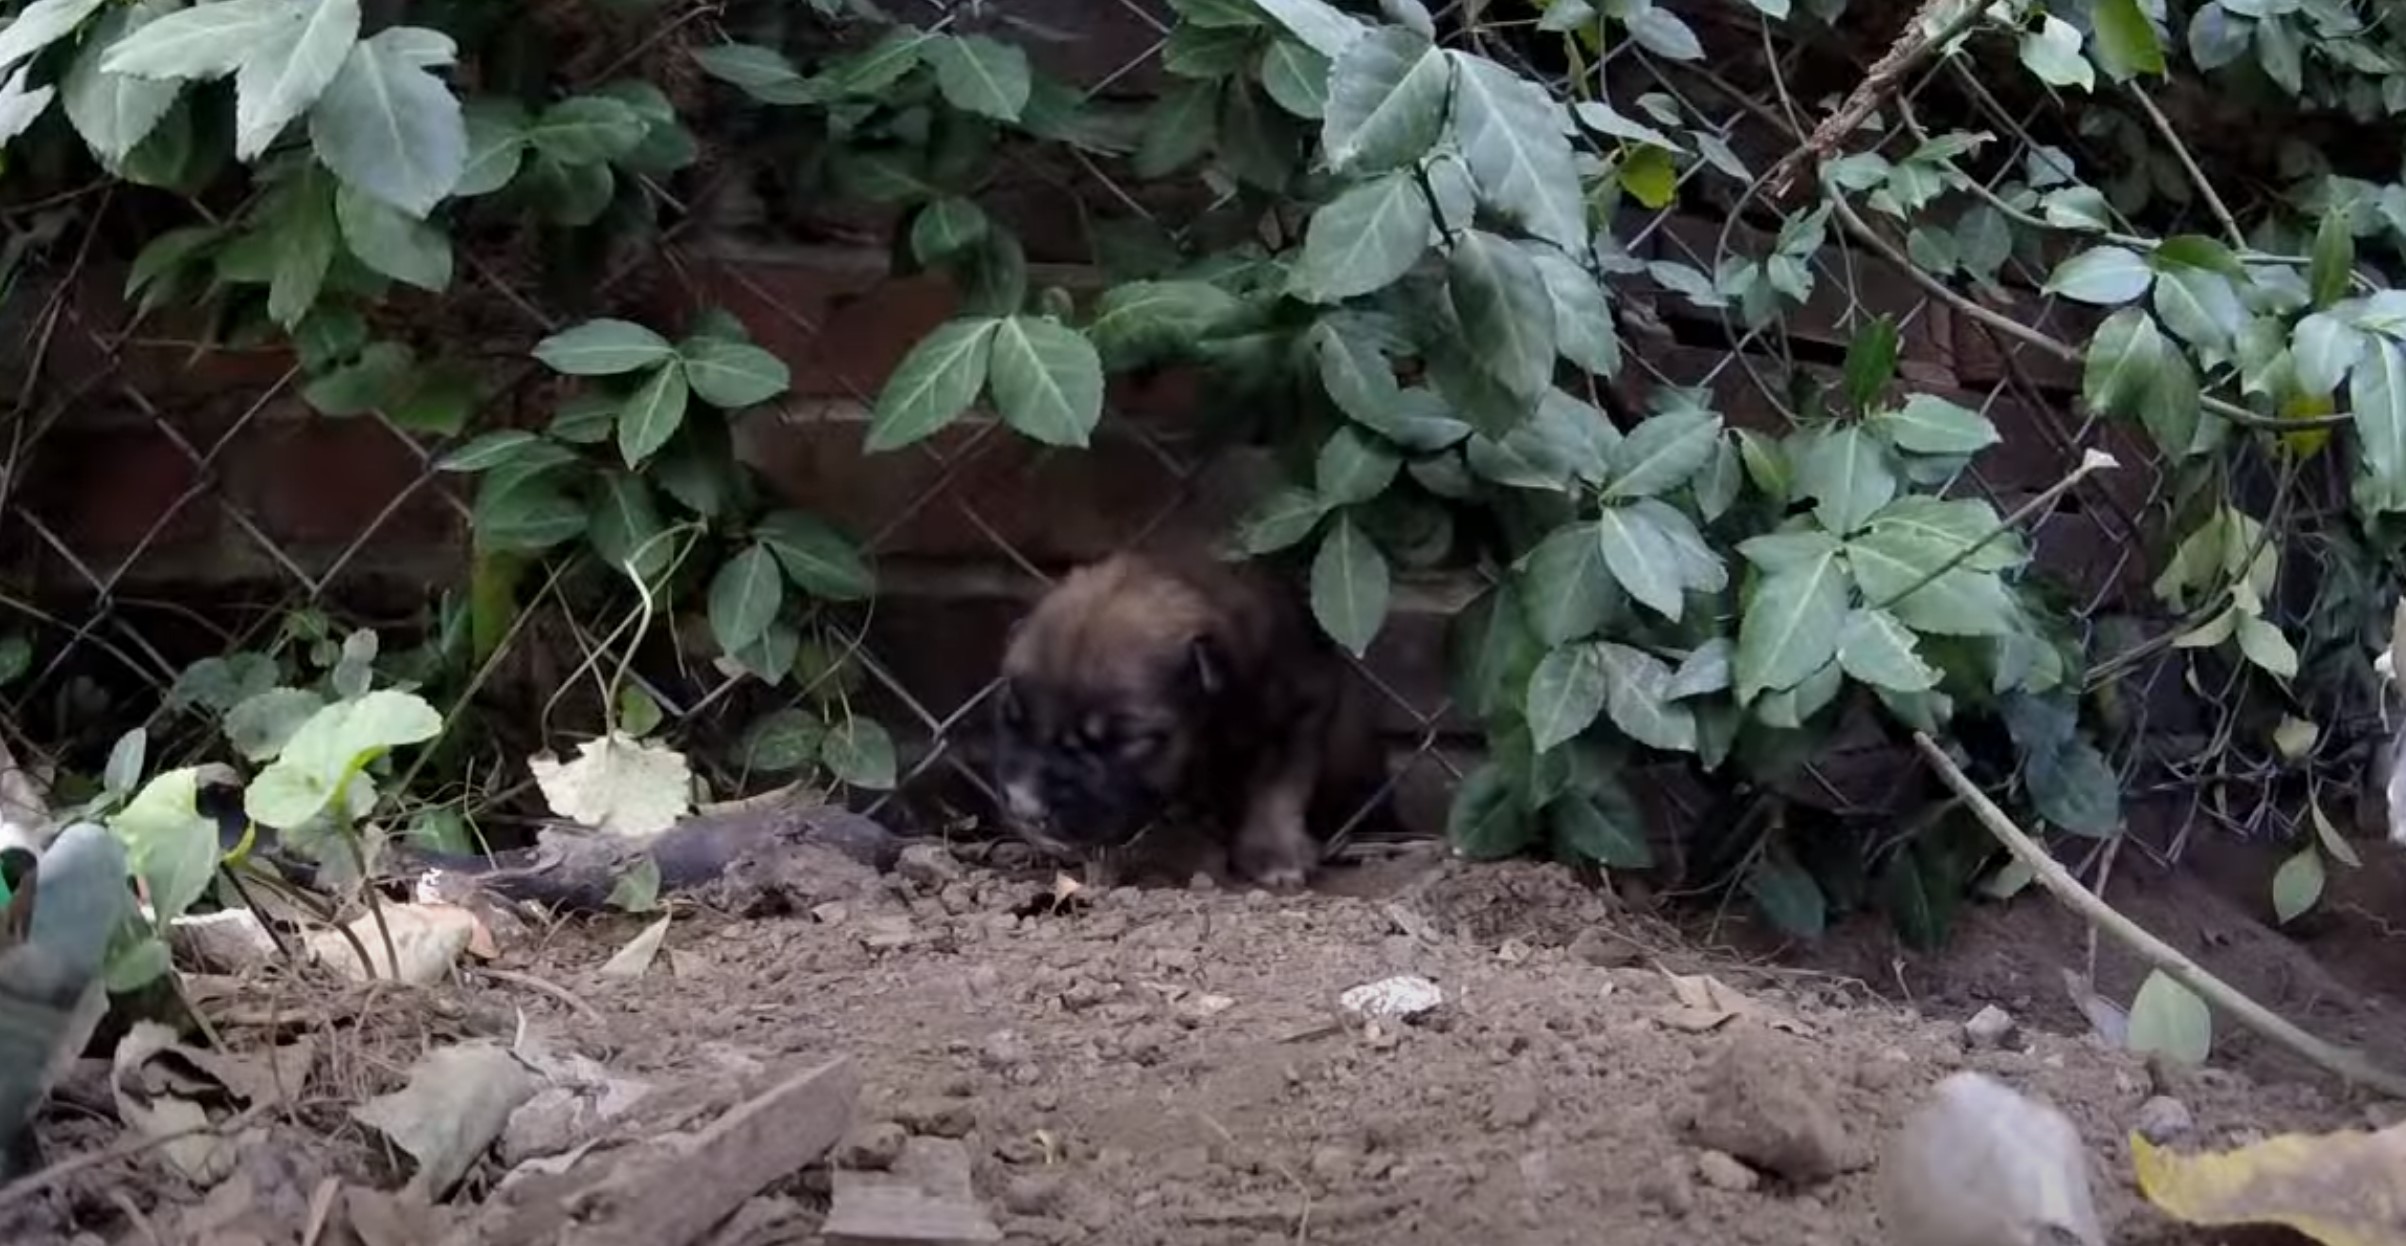 the brown puppy crawls through the fence